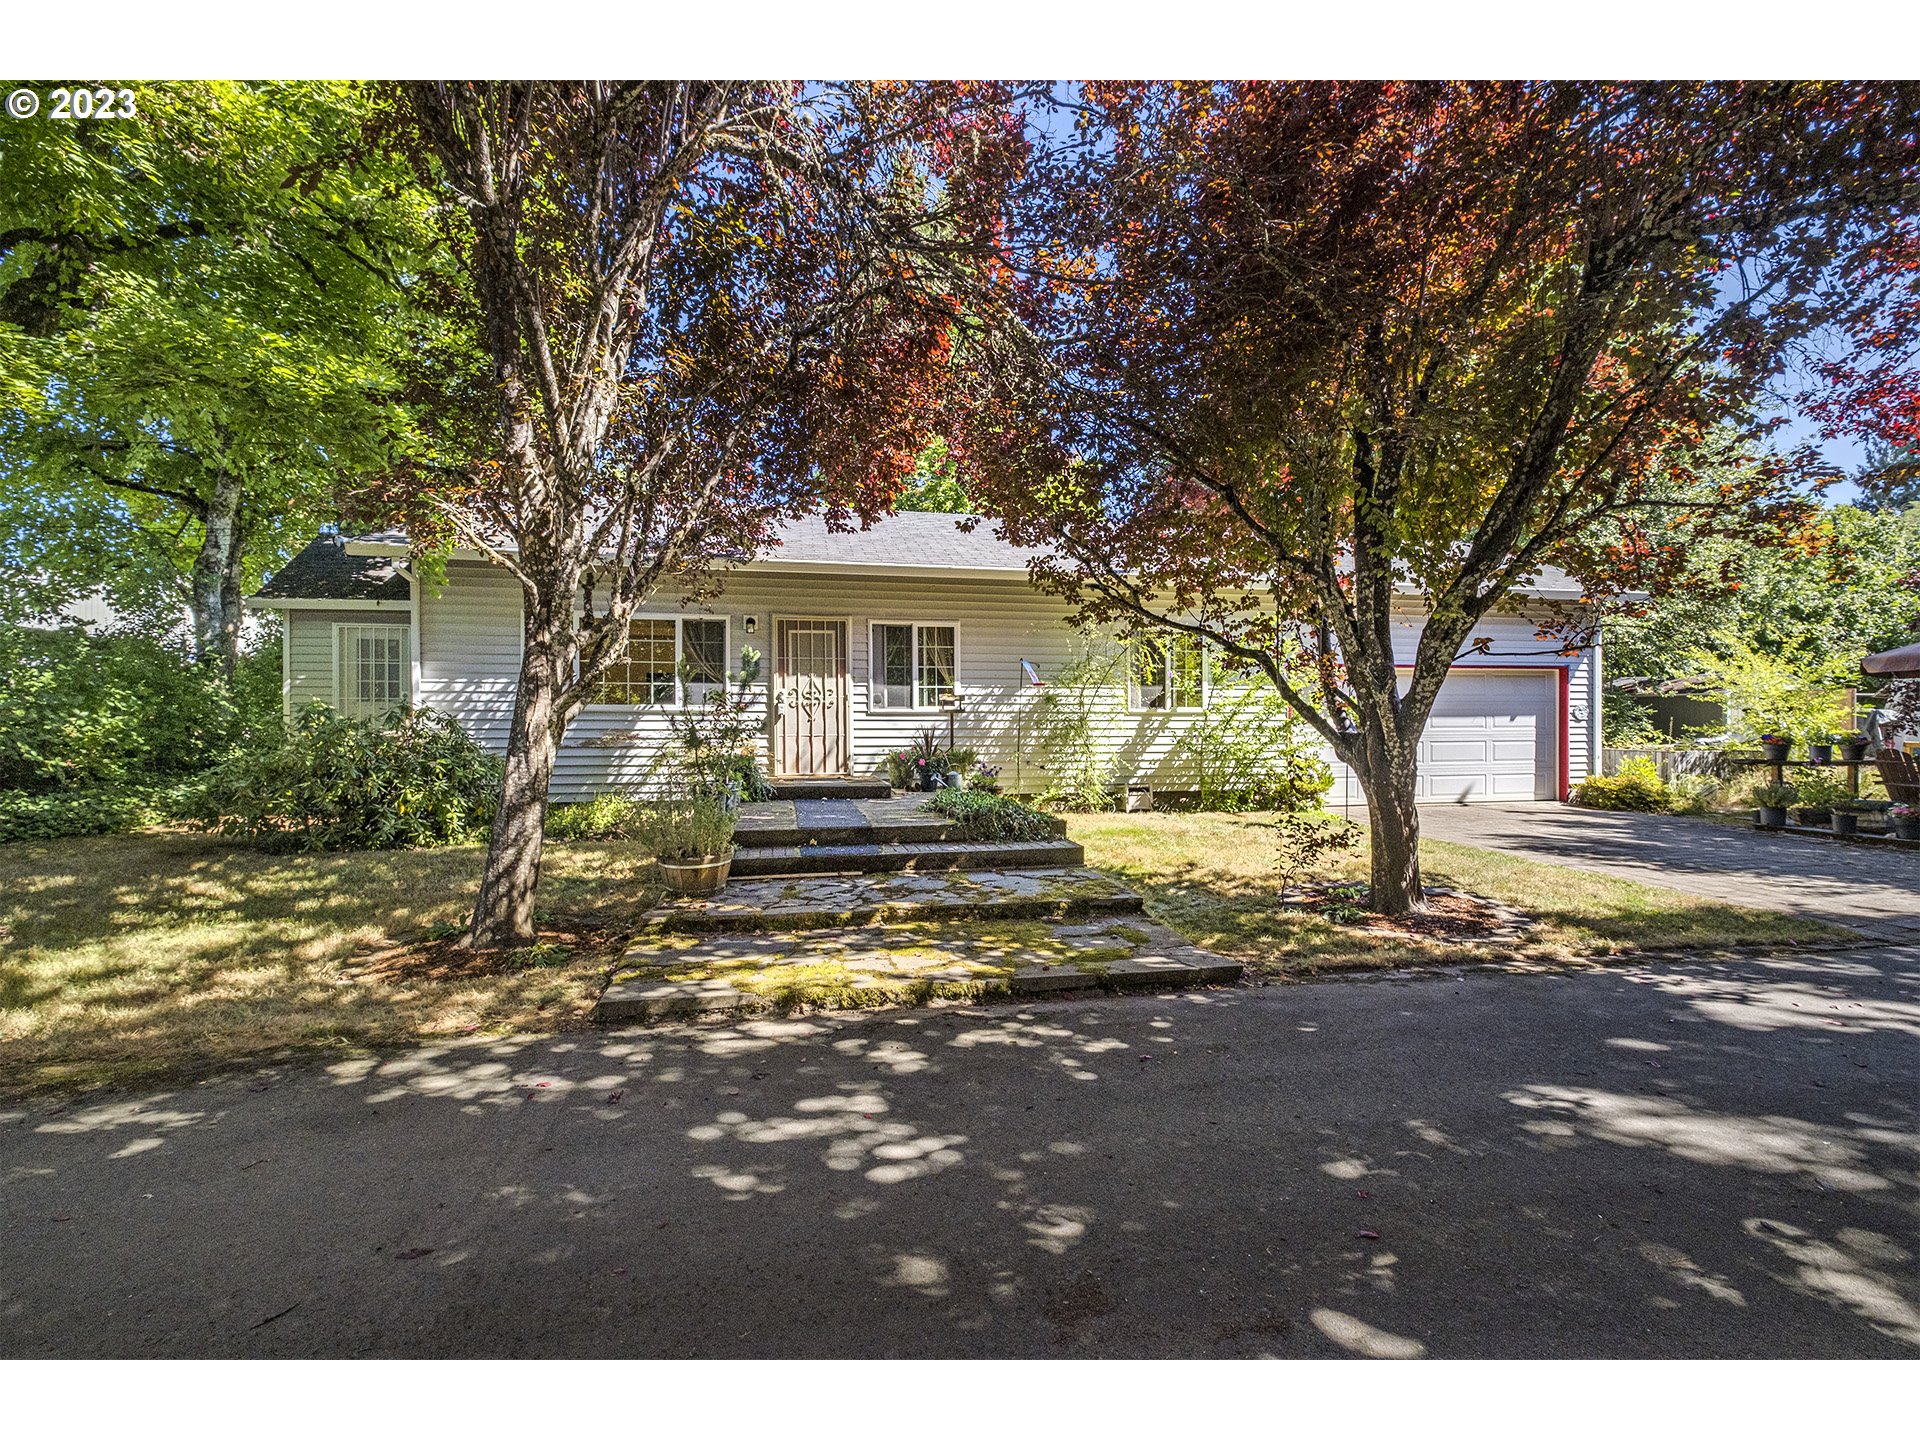 2500 22ND AVE, Forest Grove, OR 